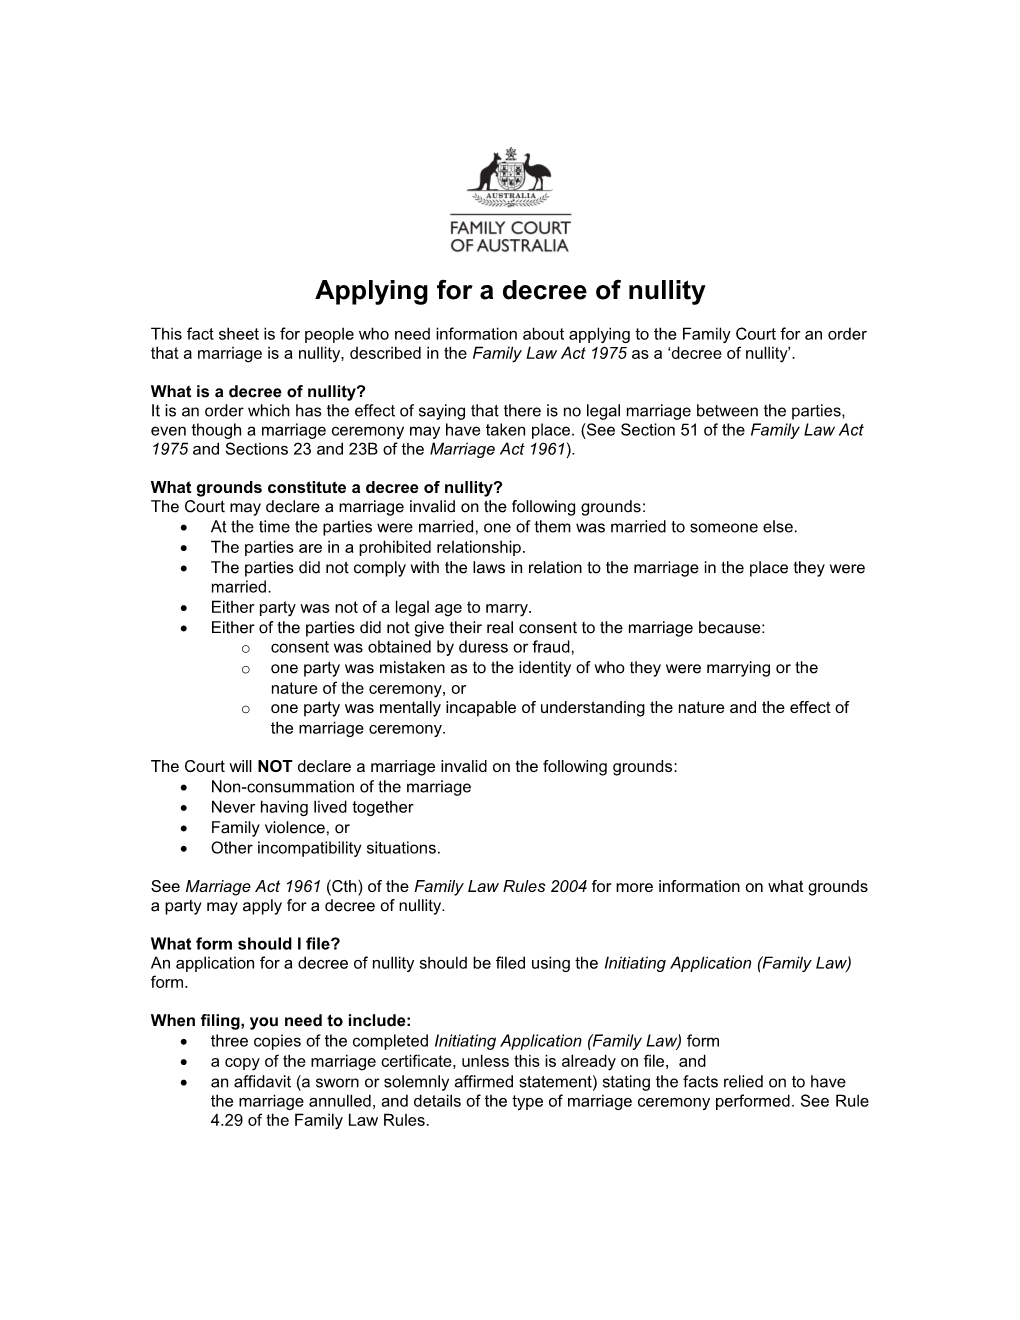 Applying for a Nullity Order